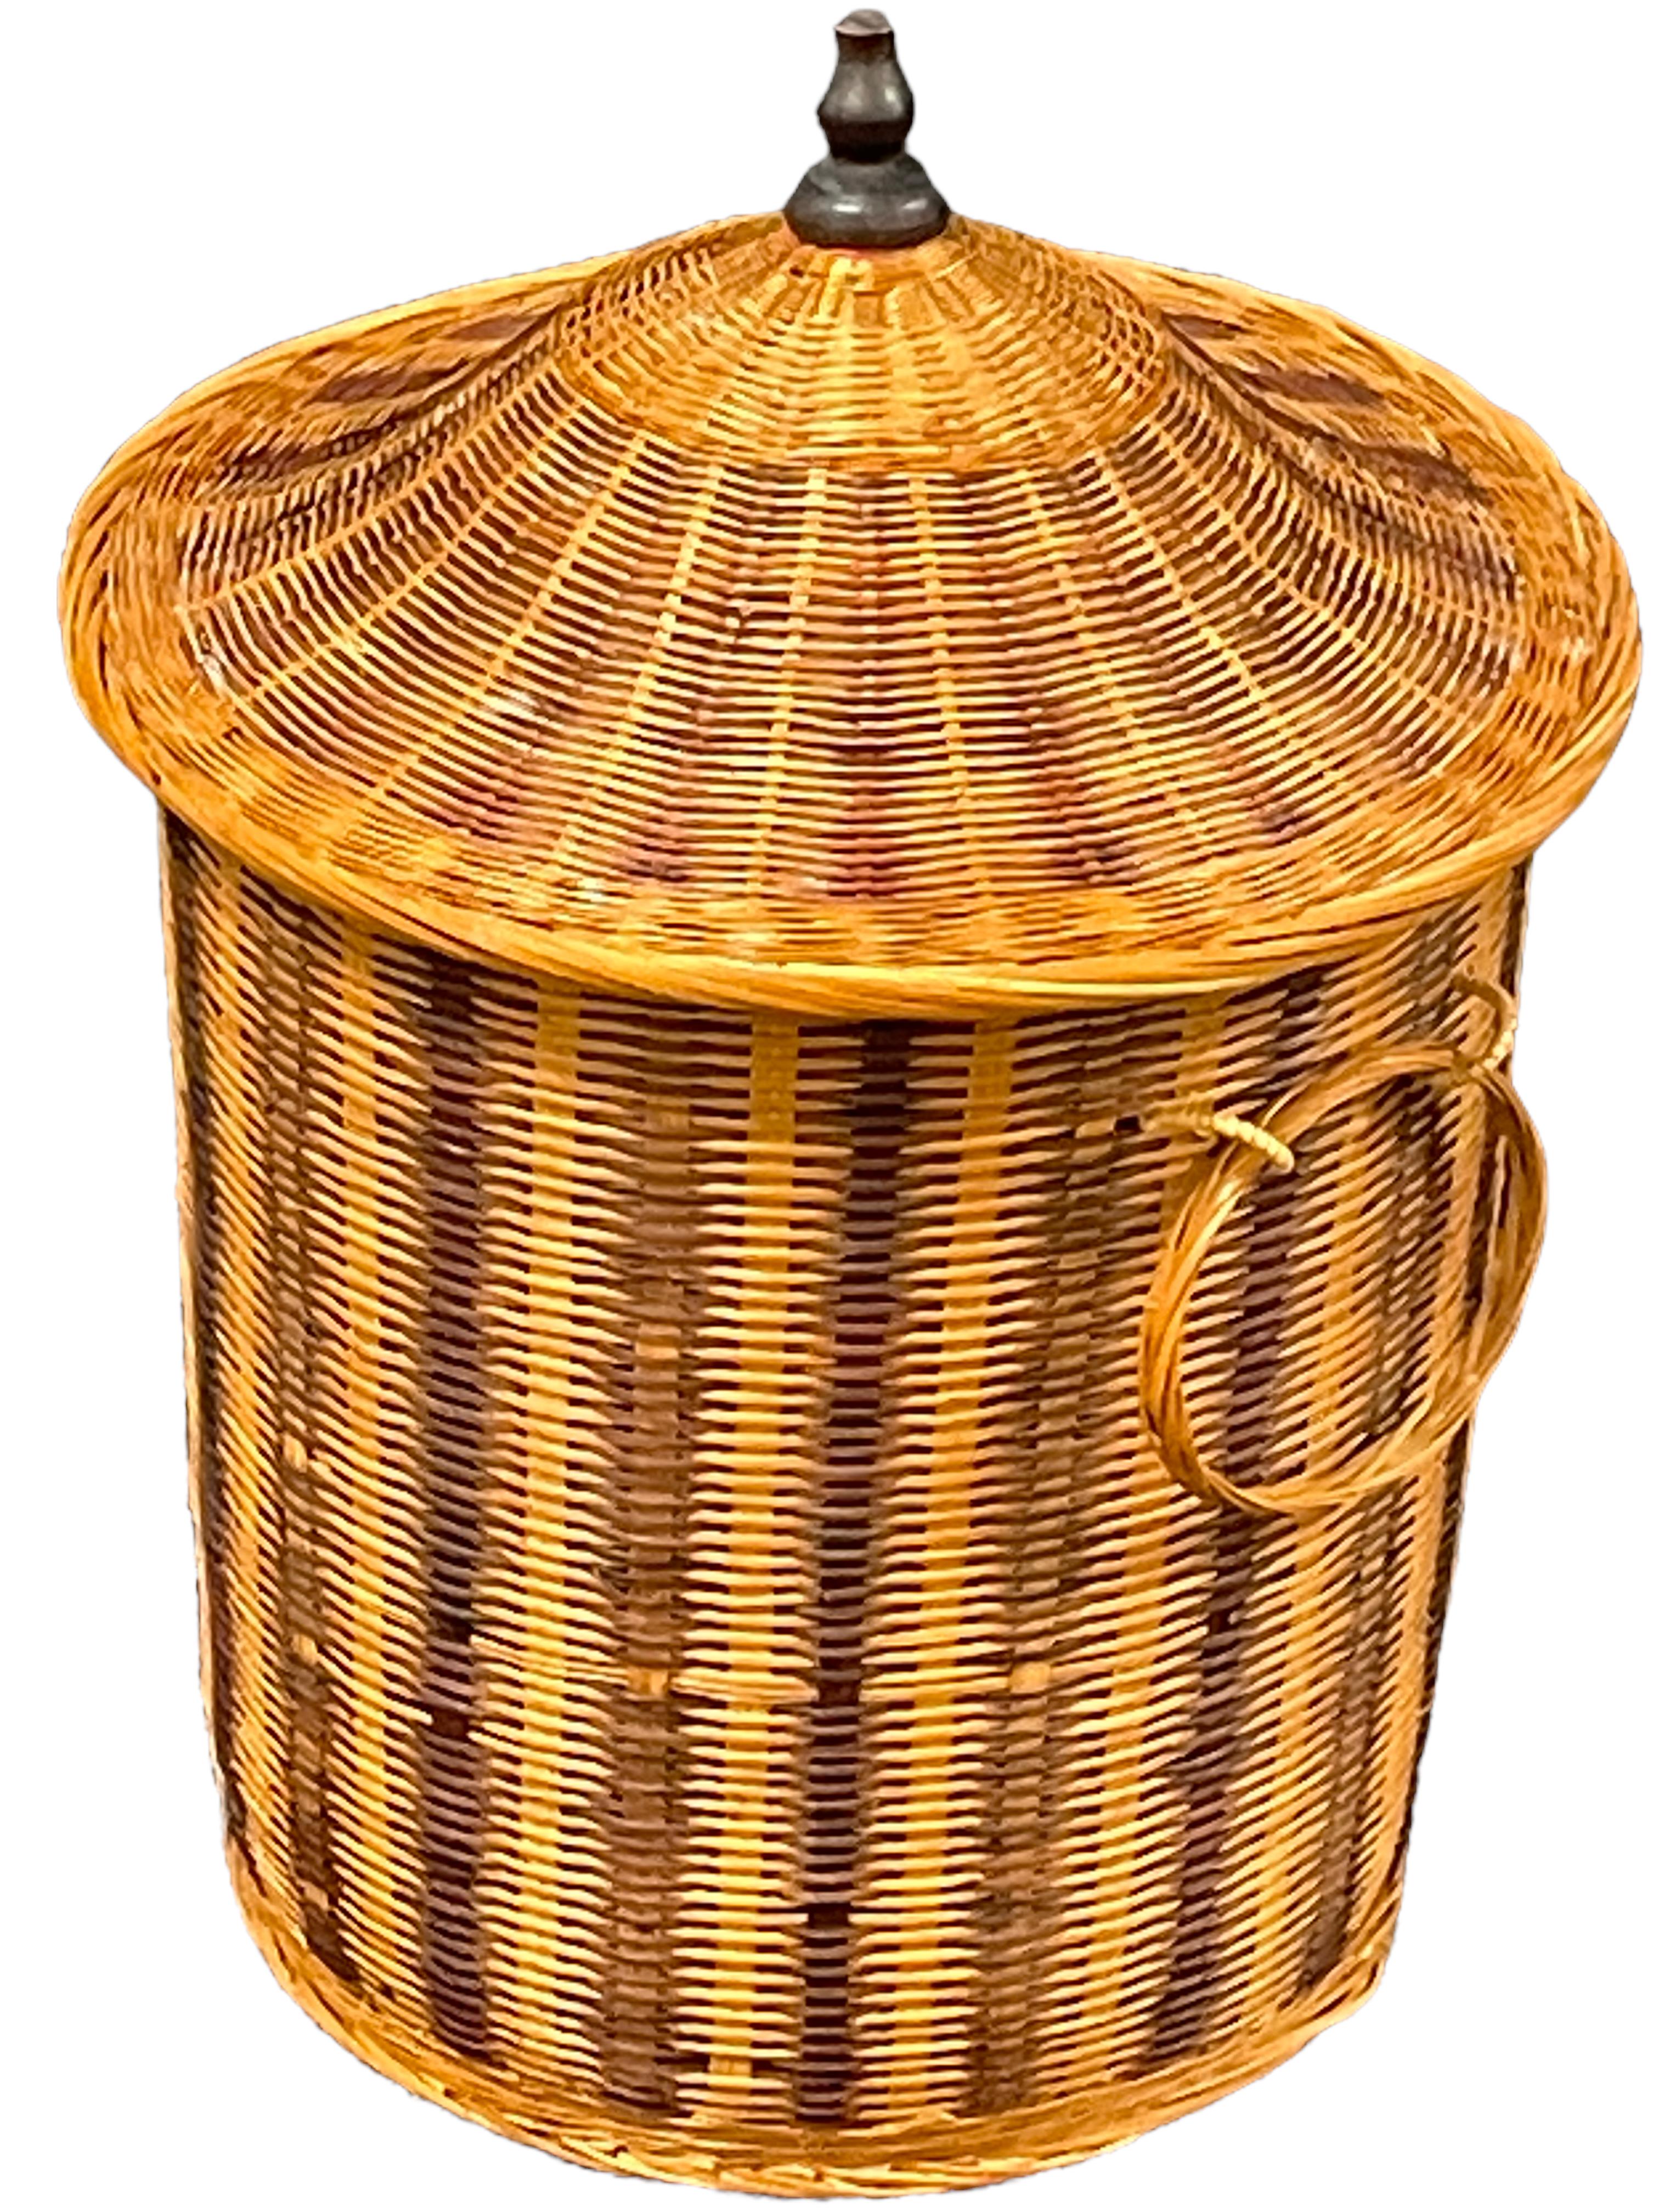 Offered is an absolutely stunning small 1980s vintage wicker laundry basket hamper with lid and wicker handles. Overall very good vintage condition with light ware consistent with age and use. A nice addition to any room. You can also use it as a